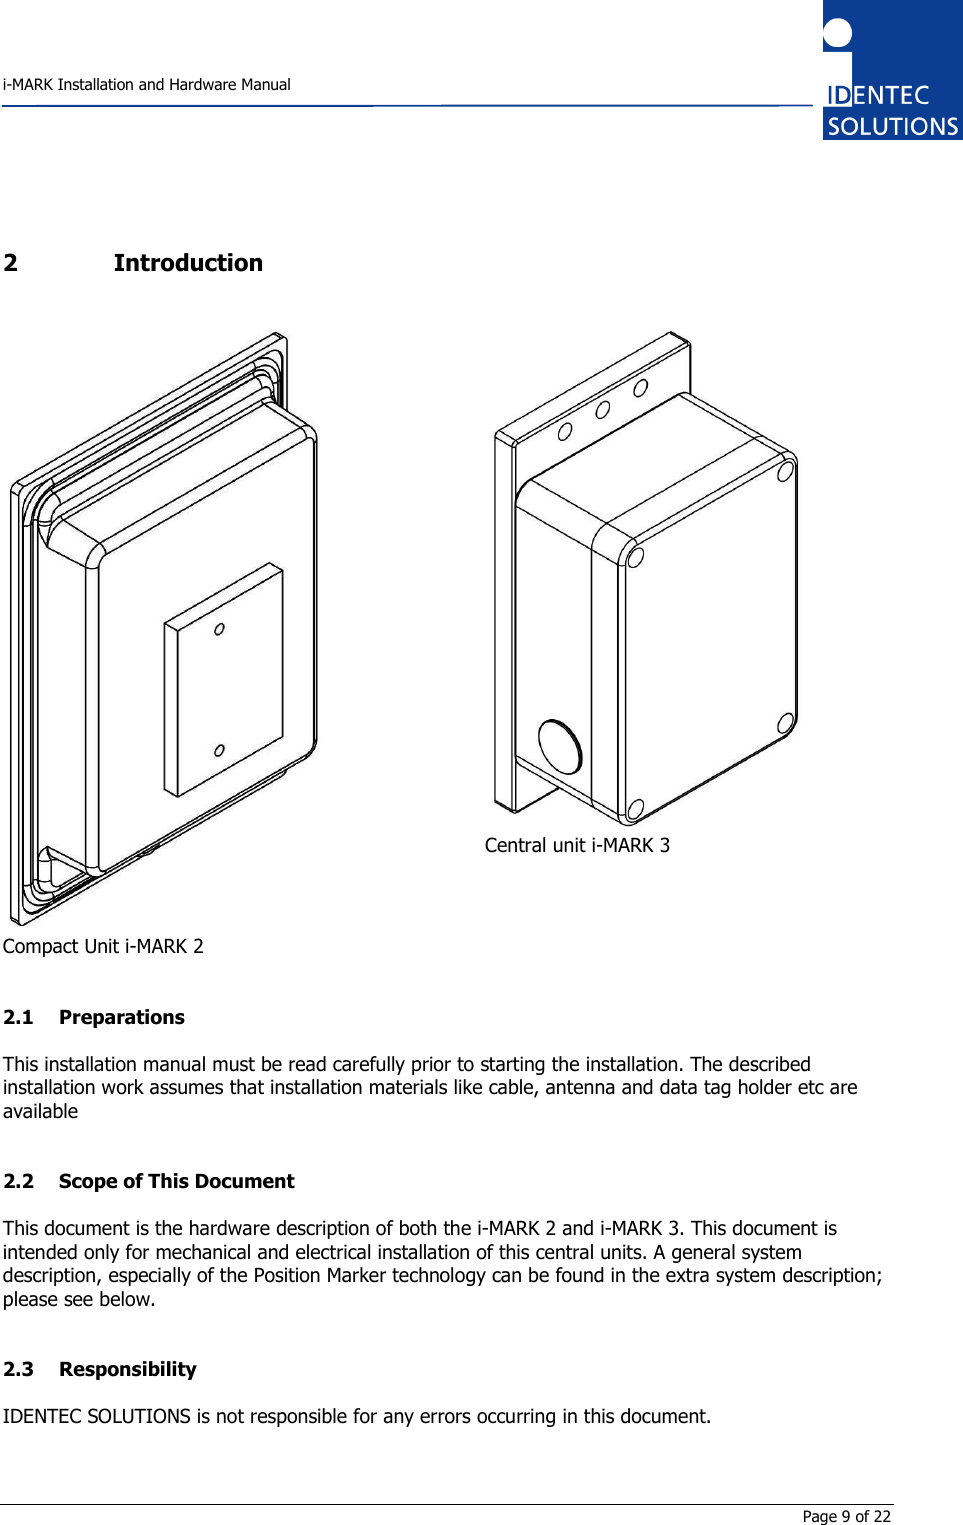    i-MARK Installation and Hardware Manual       Page 9 of 22 2 Introduction   Compact Unit i-MARK 2  Central unit i-MARK 3  2.1 Preparations This installation manual must be read carefully prior to starting the installation. The described installation work assumes that installation materials like cable, antenna and data tag holder etc are available  2.2 Scope of This Document This document is the hardware description of both the i-MARK 2 and i-MARK 3. This document is intended only for mechanical and electrical installation of this central units. A general system description, especially of the Position Marker technology can be found in the extra system description; please see below.  2.3 Responsibility IDENTEC SOLUTIONS is not responsible for any errors occurring in this document.  